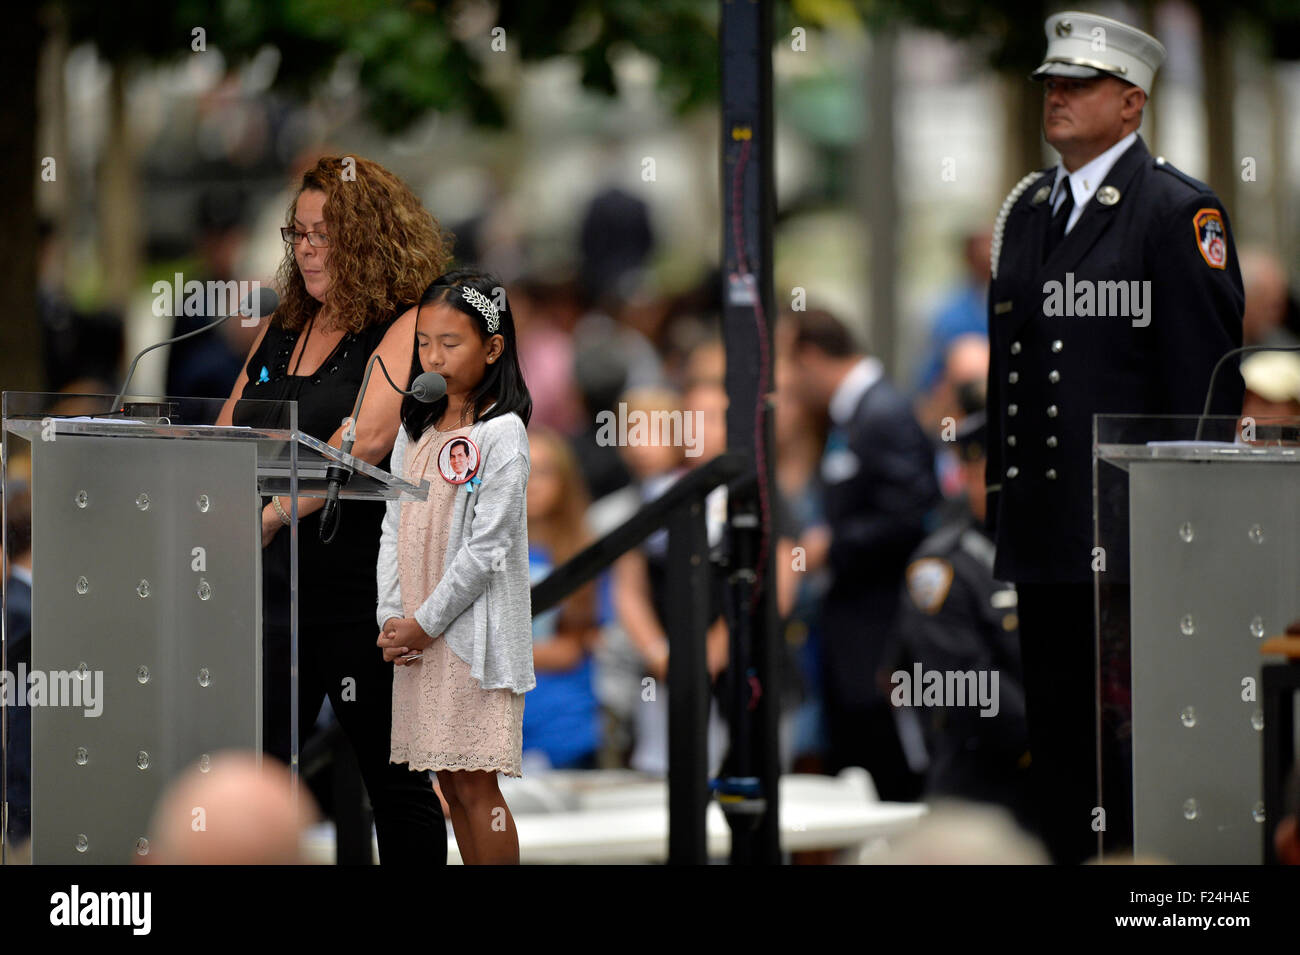 New York, USA. 11th Sep, 2015. Victims' family members read the victims' names during a remembrance ceremony of the 14th anniversary of the Sept. 11 attacks at the World Trade Center site in New York on Friday, Sept. 11, 2015. © Wang Lei/Xinhua/Alamy Live News Stock Photo